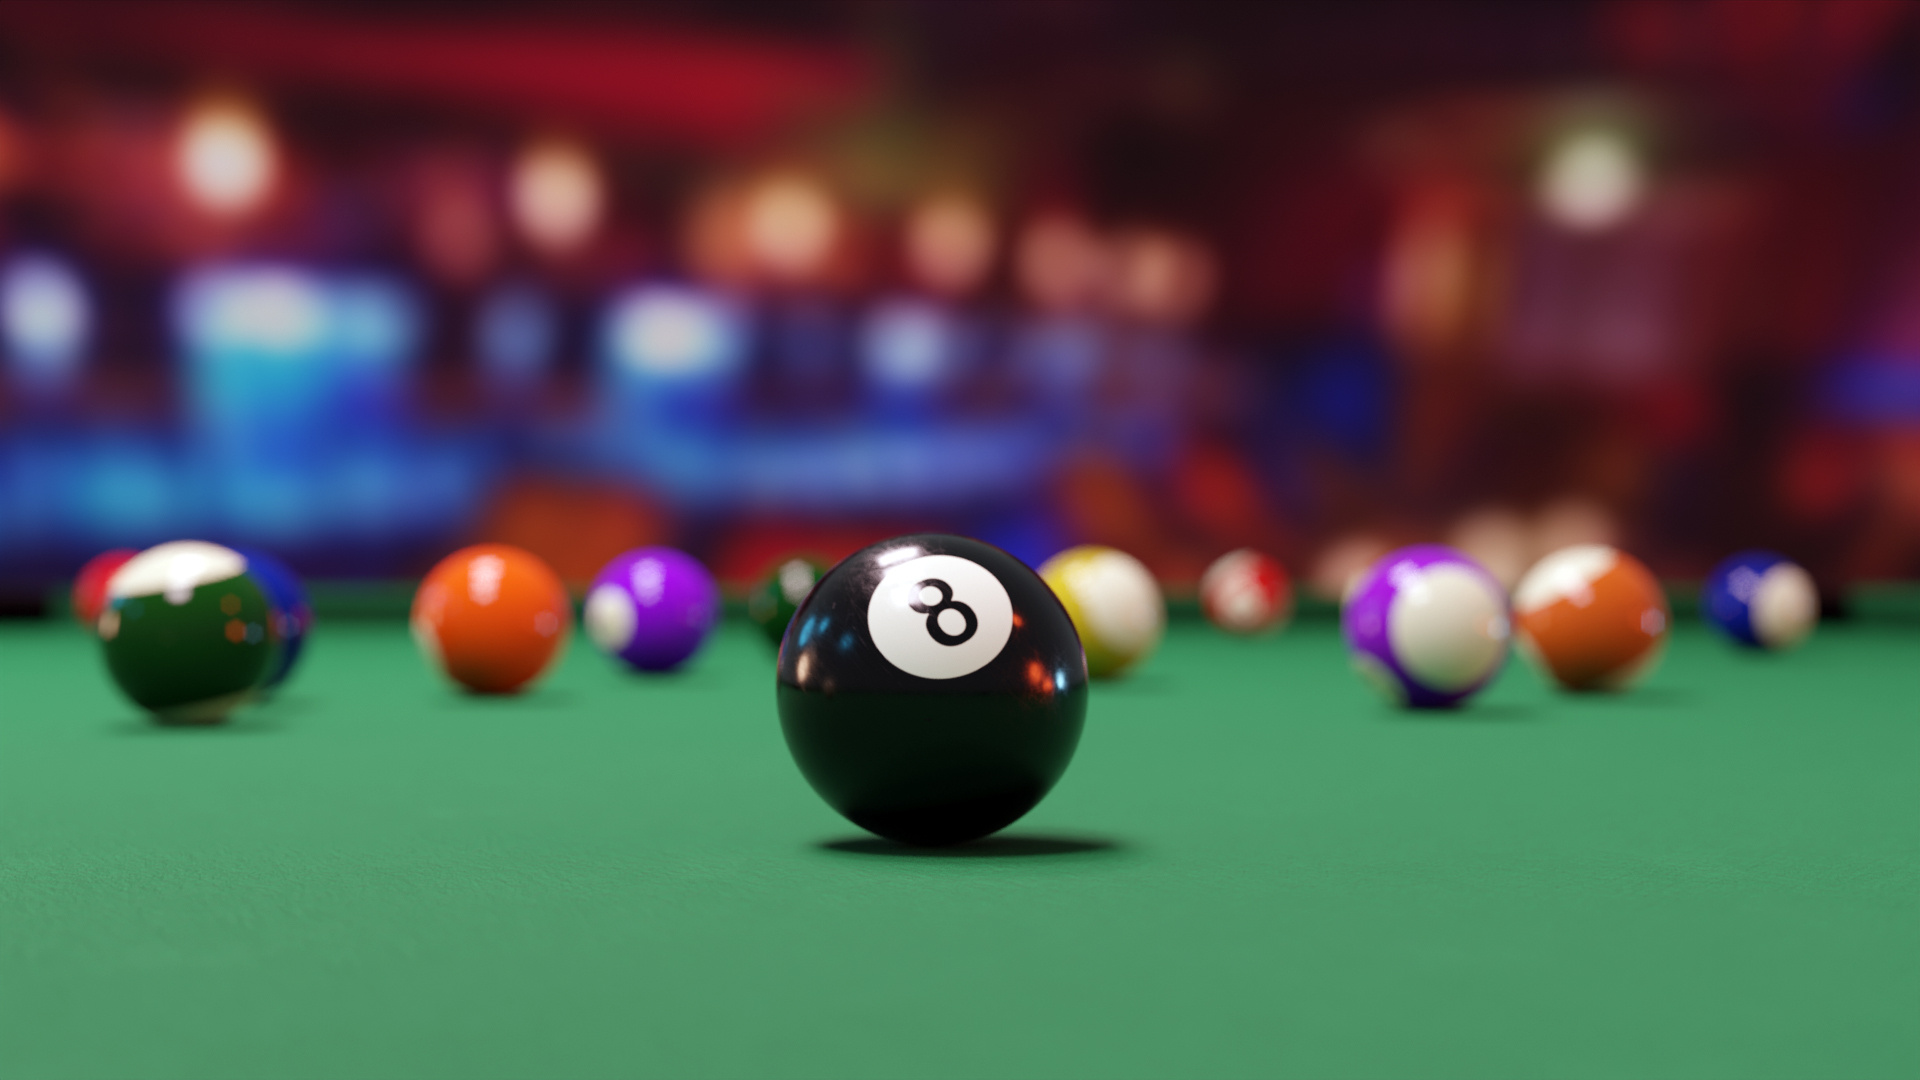 Pool (Cue Sports): Classic eight-ball, Seven solid-colored balls, seven striped balls, and the black 8 ball. 1920x1080 Full HD Wallpaper.